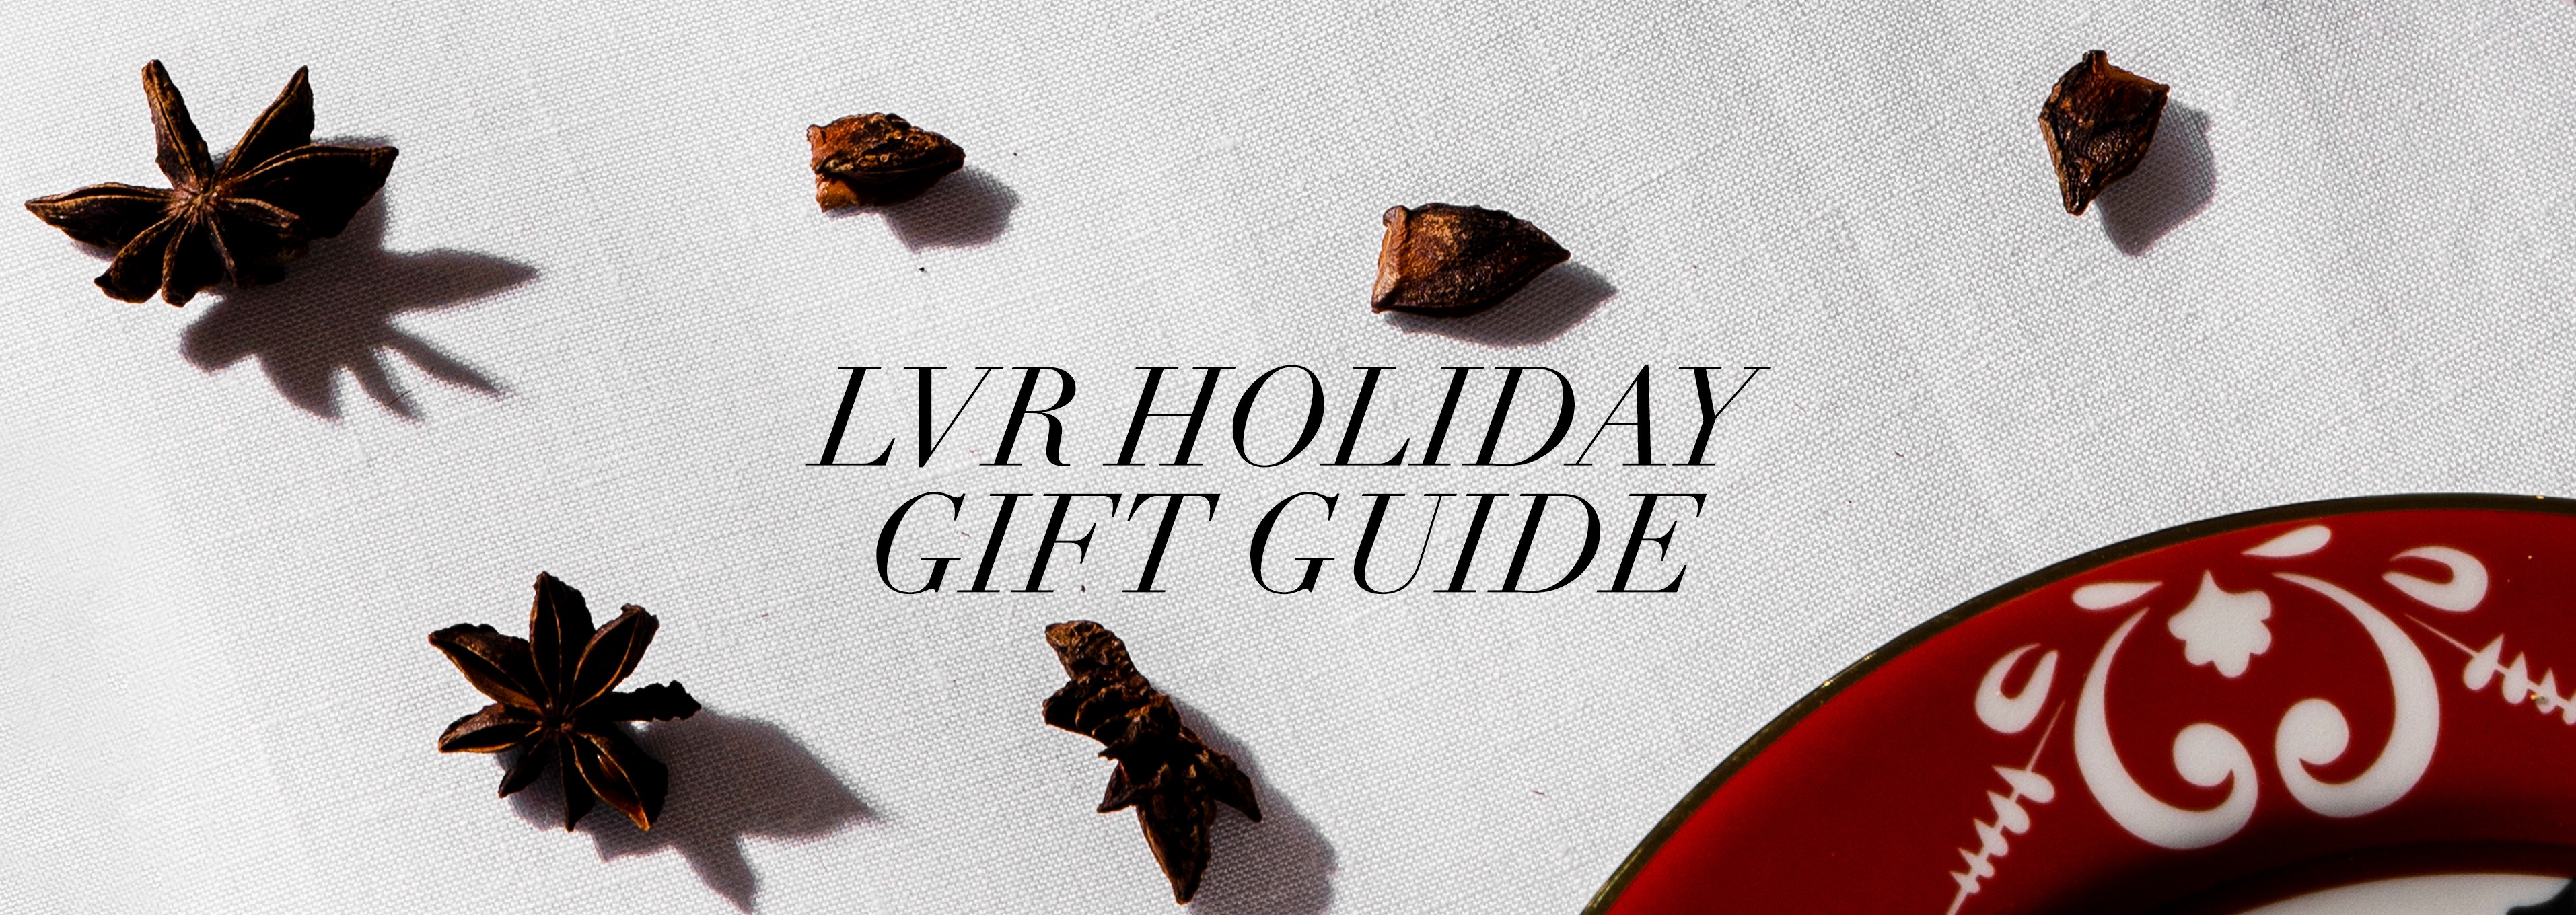 The Holidays Gift Guide 2021 for Women and Men